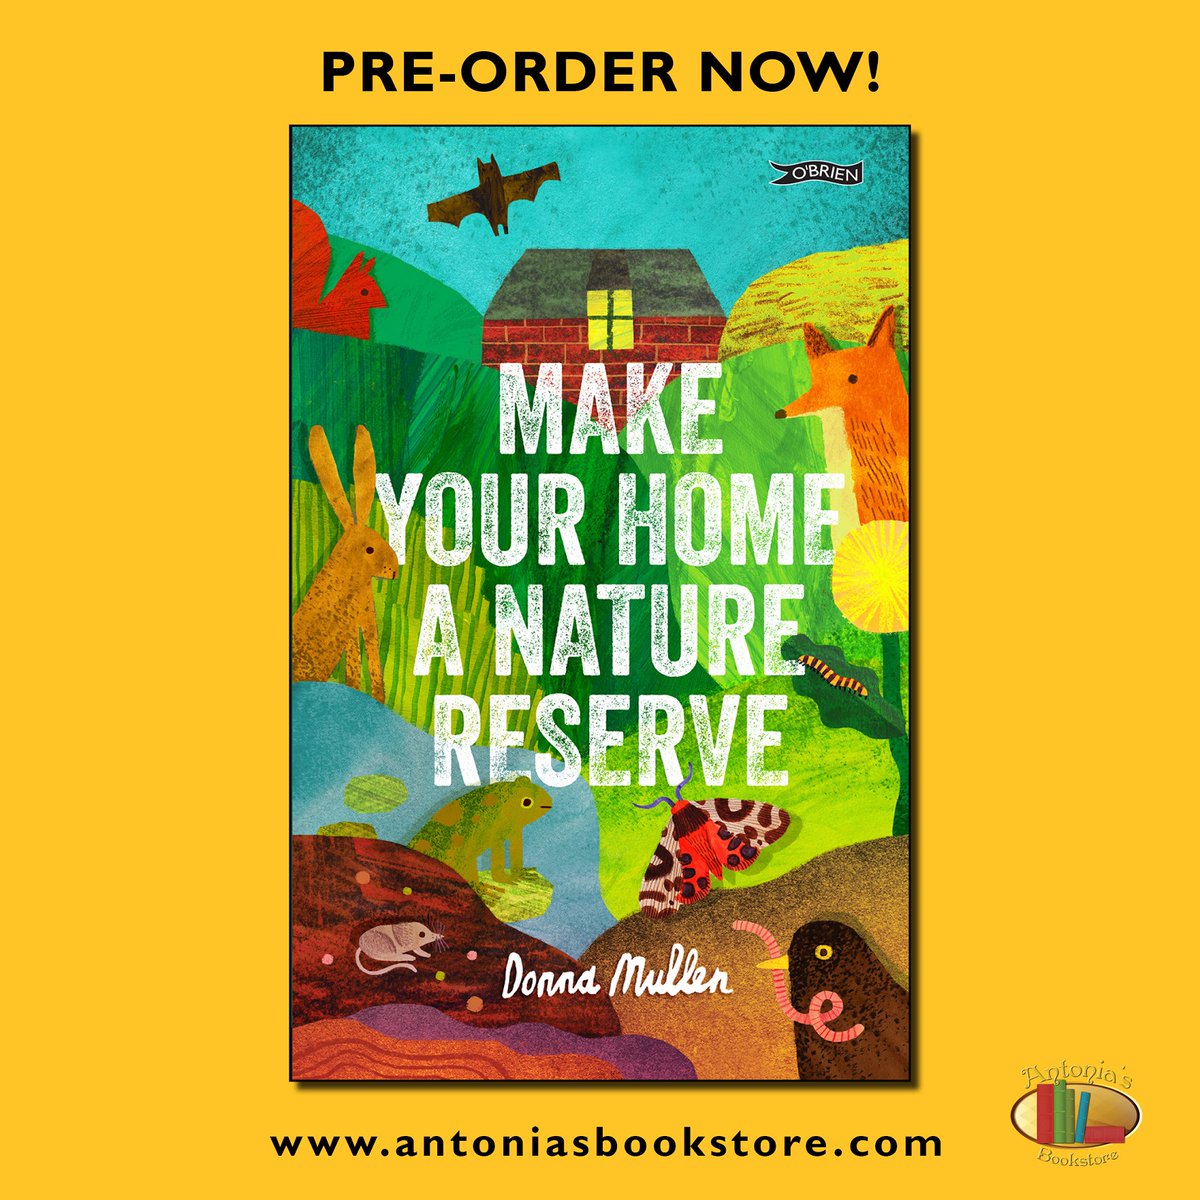 Exciting Book Announcement! Cover Reveal for Make Your Home a Nature Reserve by Donna Mullen and illustrated by Eoin O’Brien. Cover art by Anne O’Hara. Coming out April 2024 from @OBrienPress. Pre-order now from Antonia’s Bookstore antoniasbookstore.com/product/make-y….